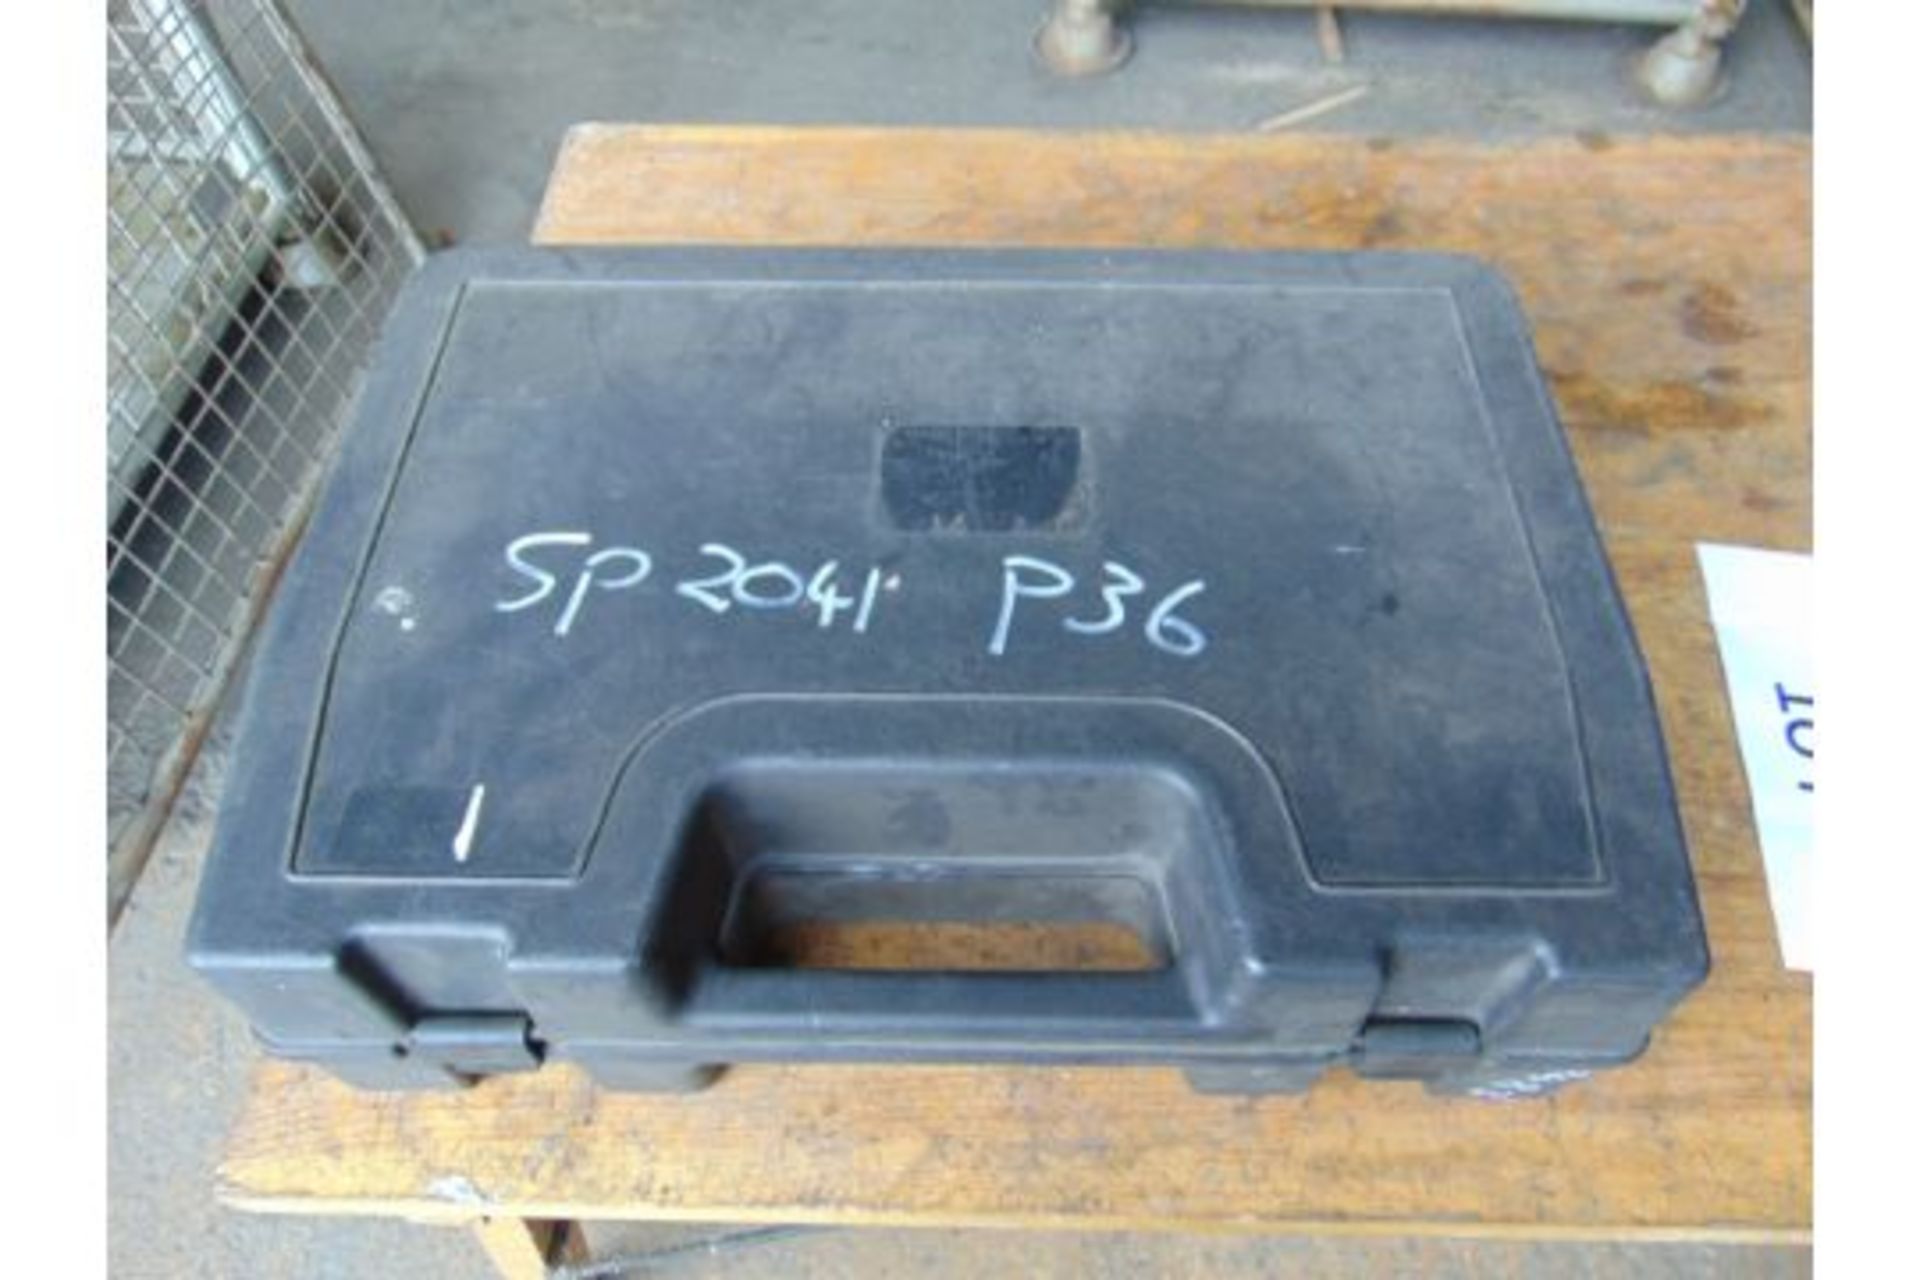 Sykes-Pickavant Cooling System Tester in Case - Image 5 of 5